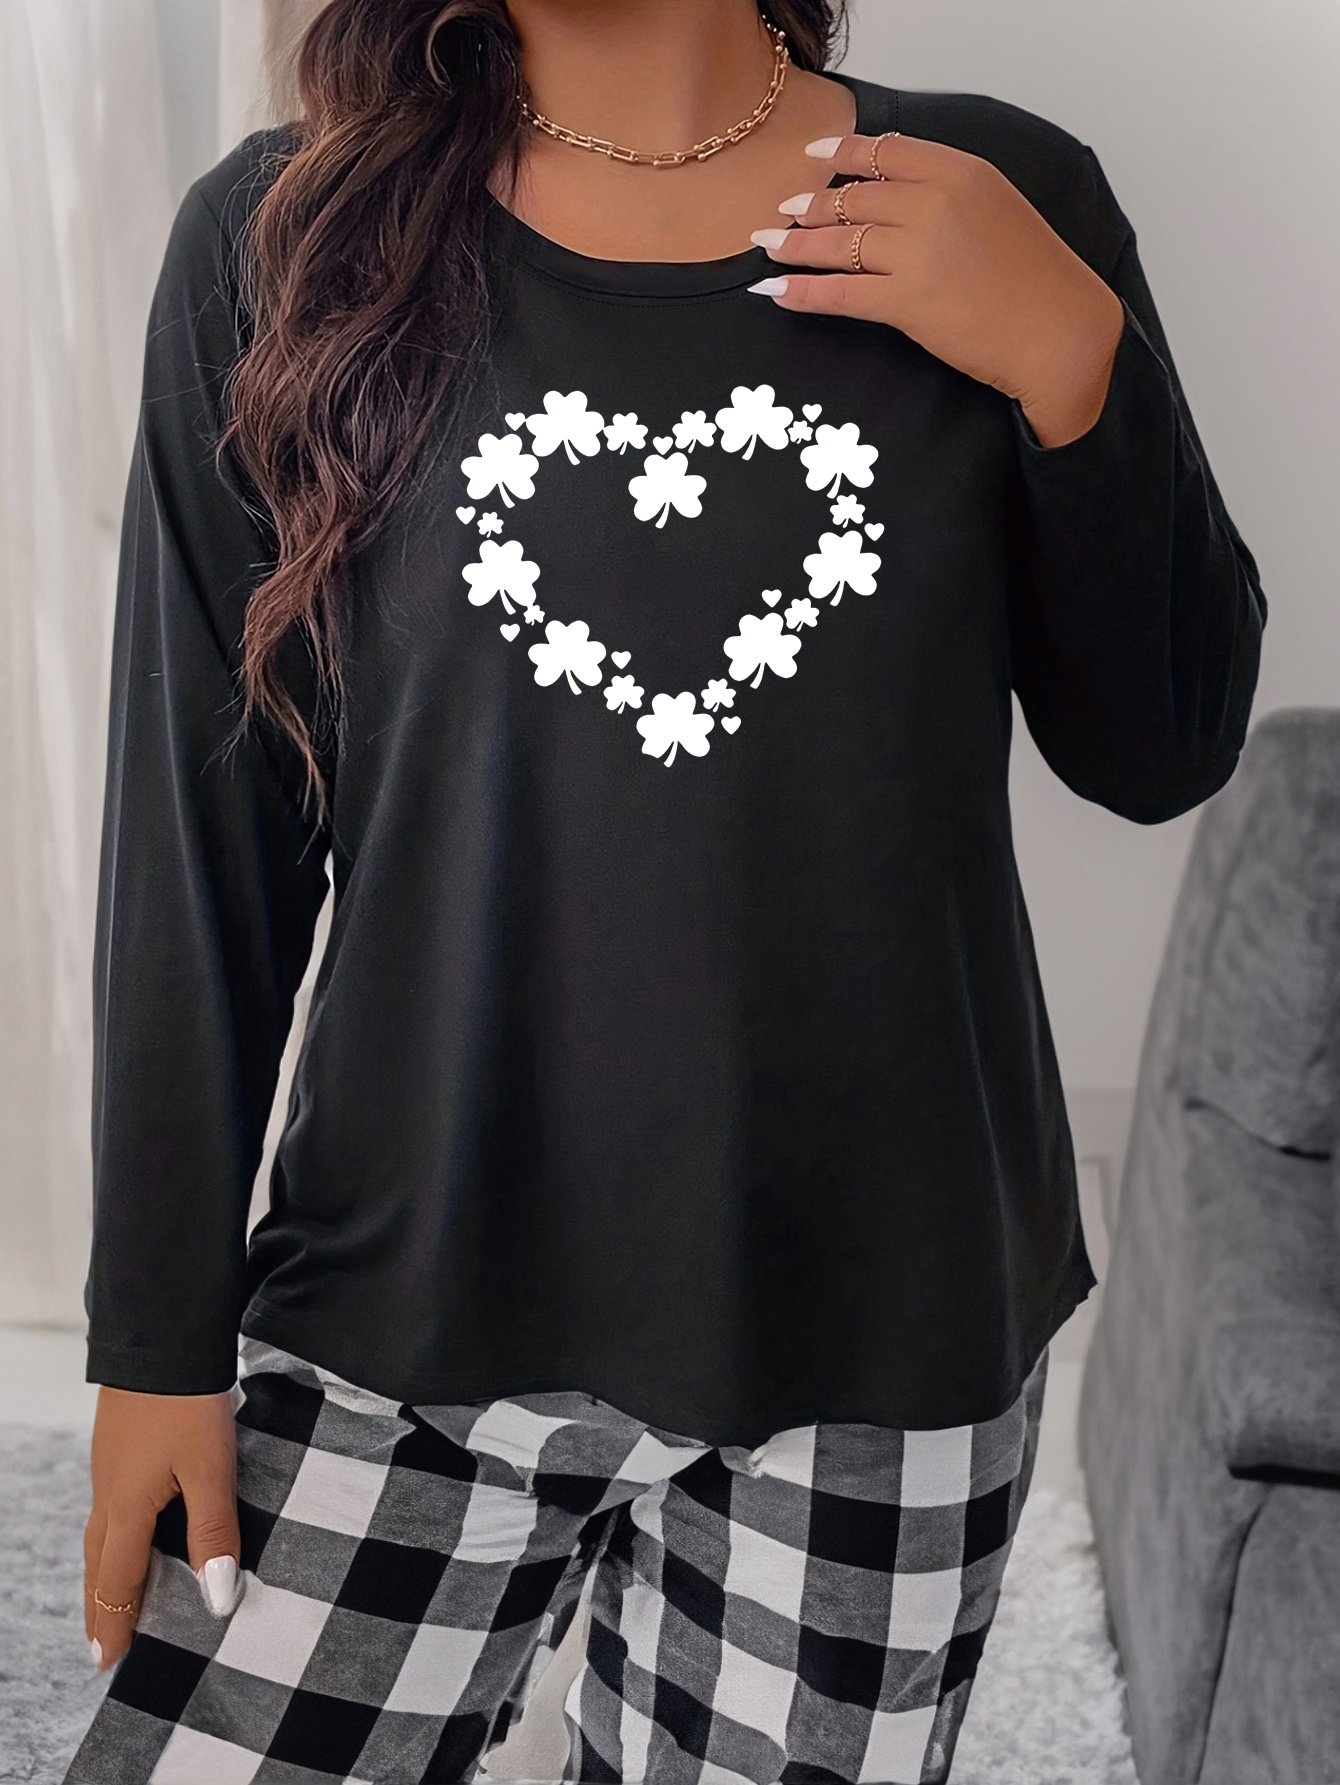 YWDJ Valentine's Day Shirts for Women Graphic Tees Clover Print